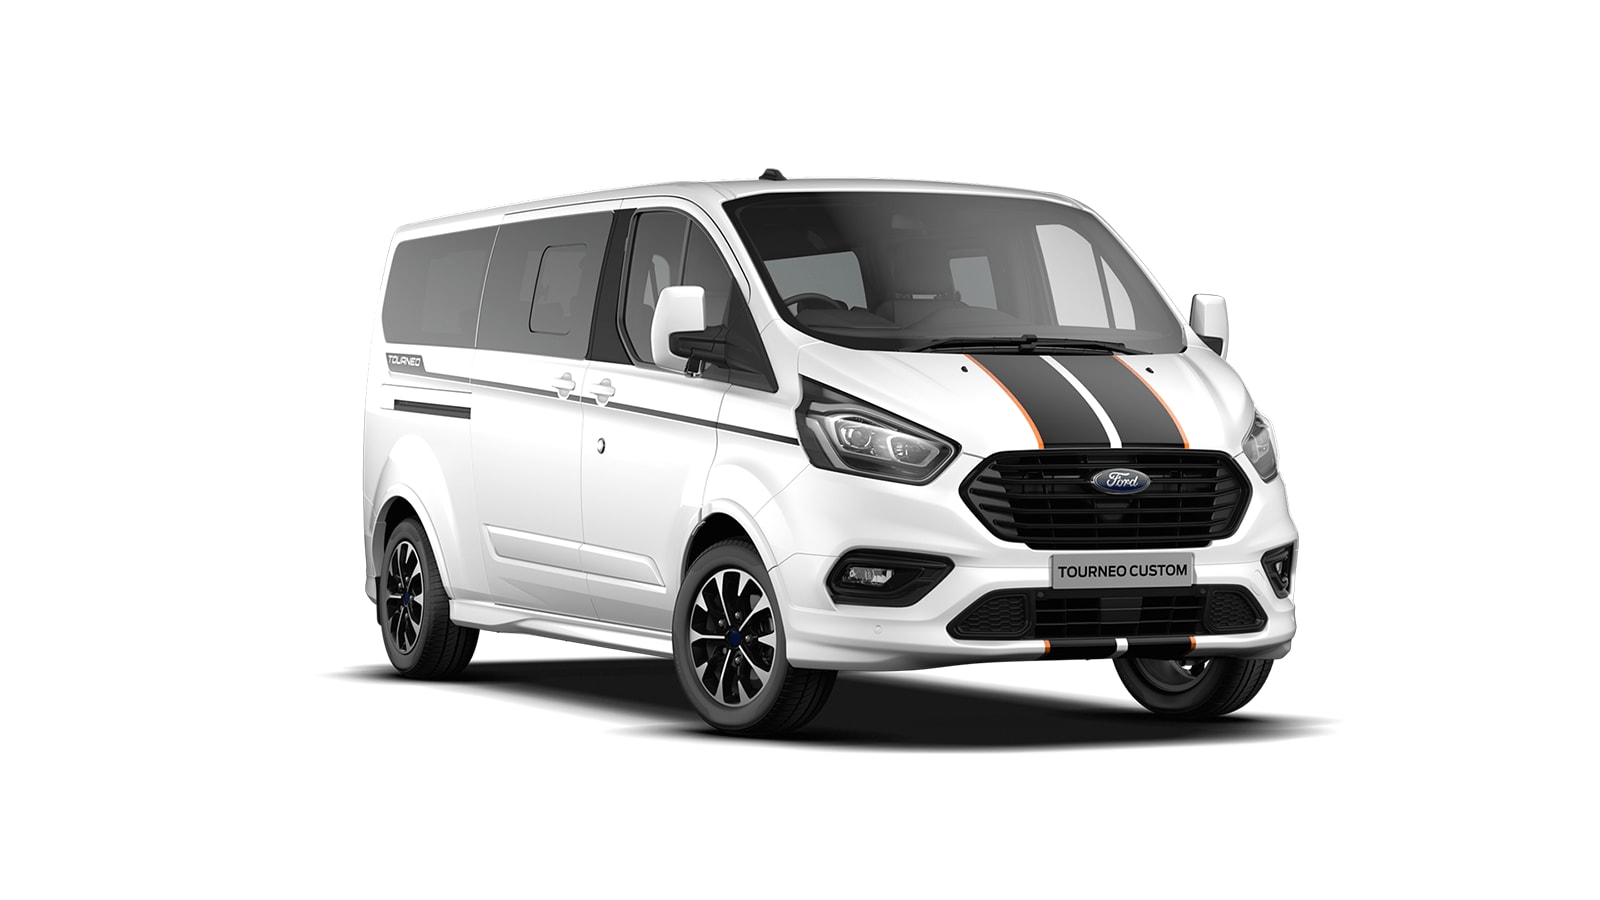 All-New Ford Tourneo Custom at RGR Garages